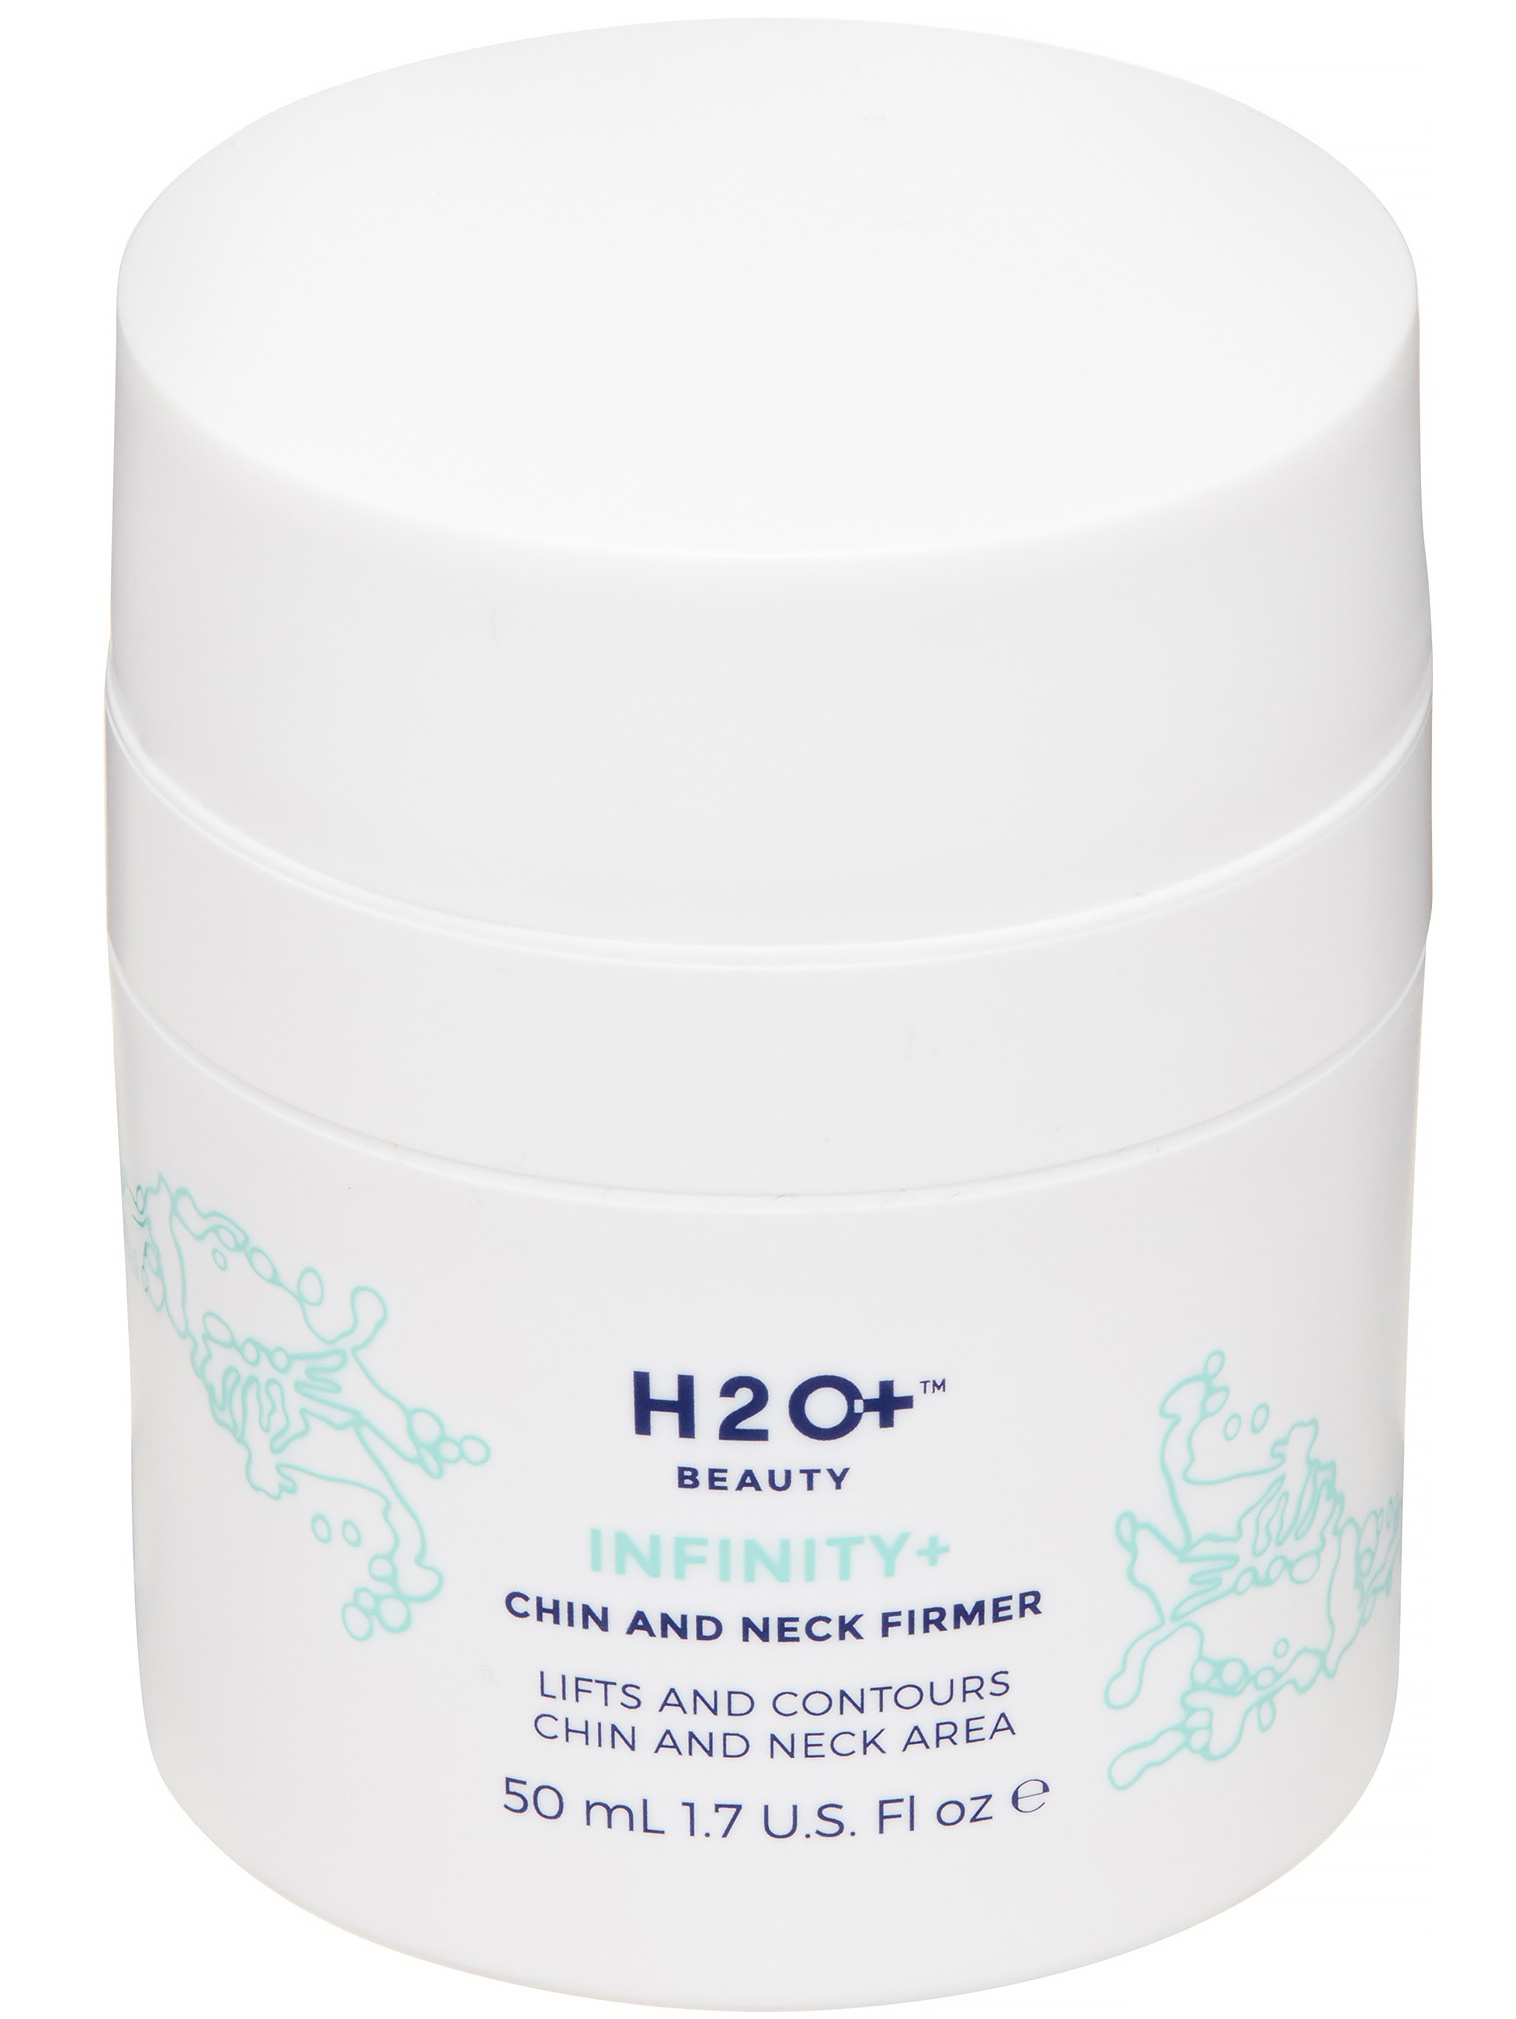 H20+ Infinity + Chin And Neck Firmer